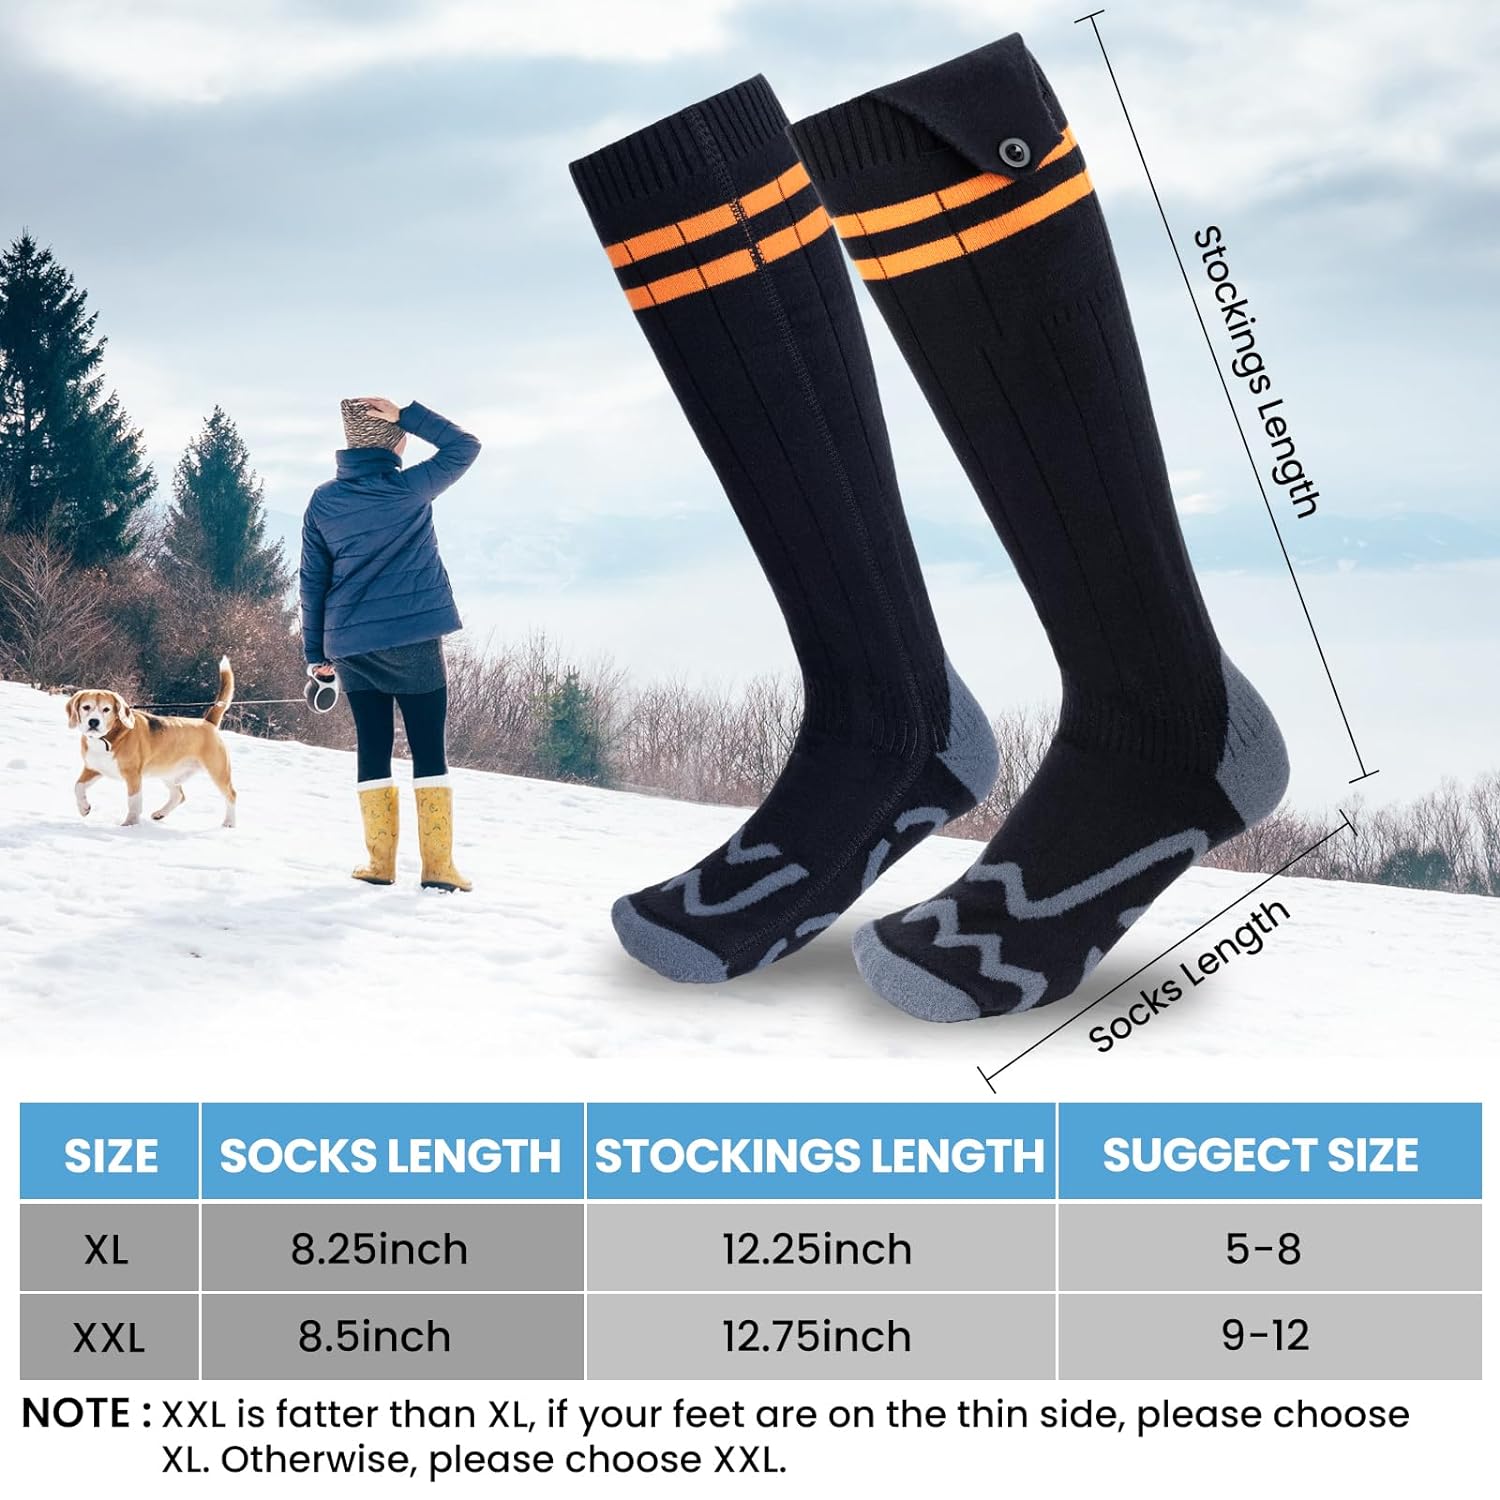 Bitlyle Heated Socks for Men Women, 5000mAh Rechargeable Heated Socks, APP Control Electric Socks for Hunting, Home, Riding, Hiking, Outdoor Work